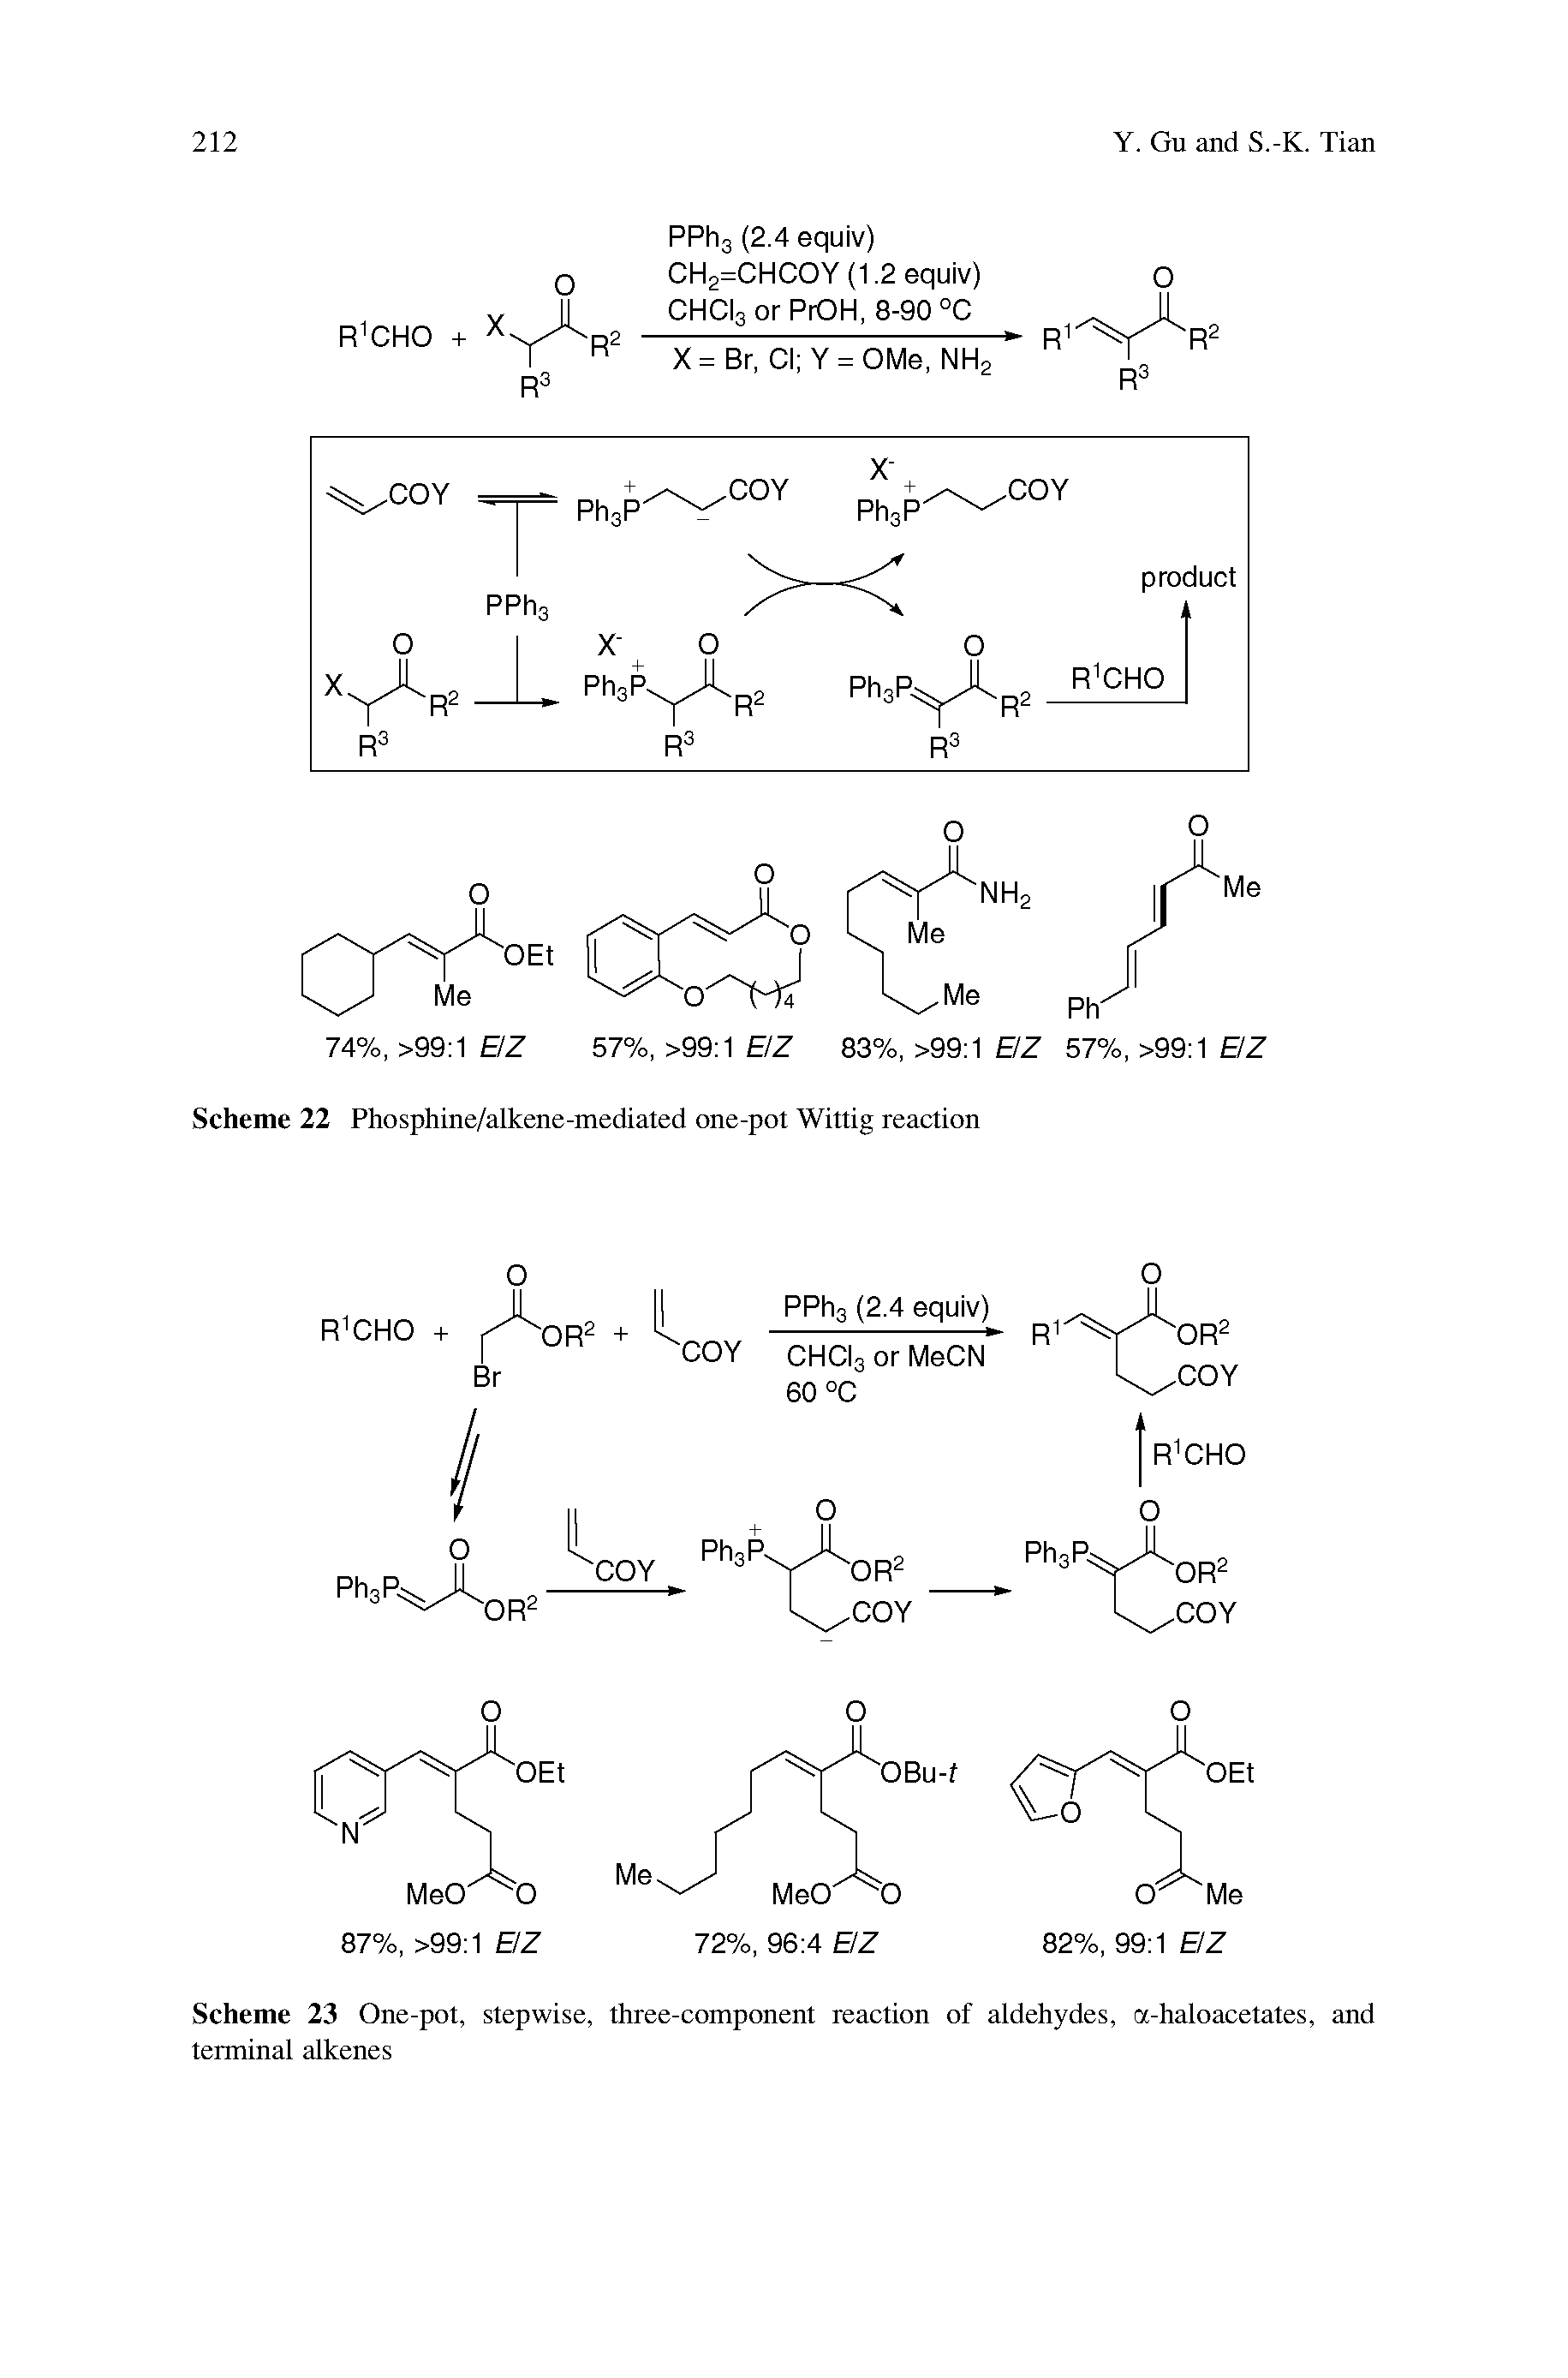 Scheme 23 One-pot, stepwise, three-component reaction of aldehydes, a-haloacetates, and terminal alkenes...